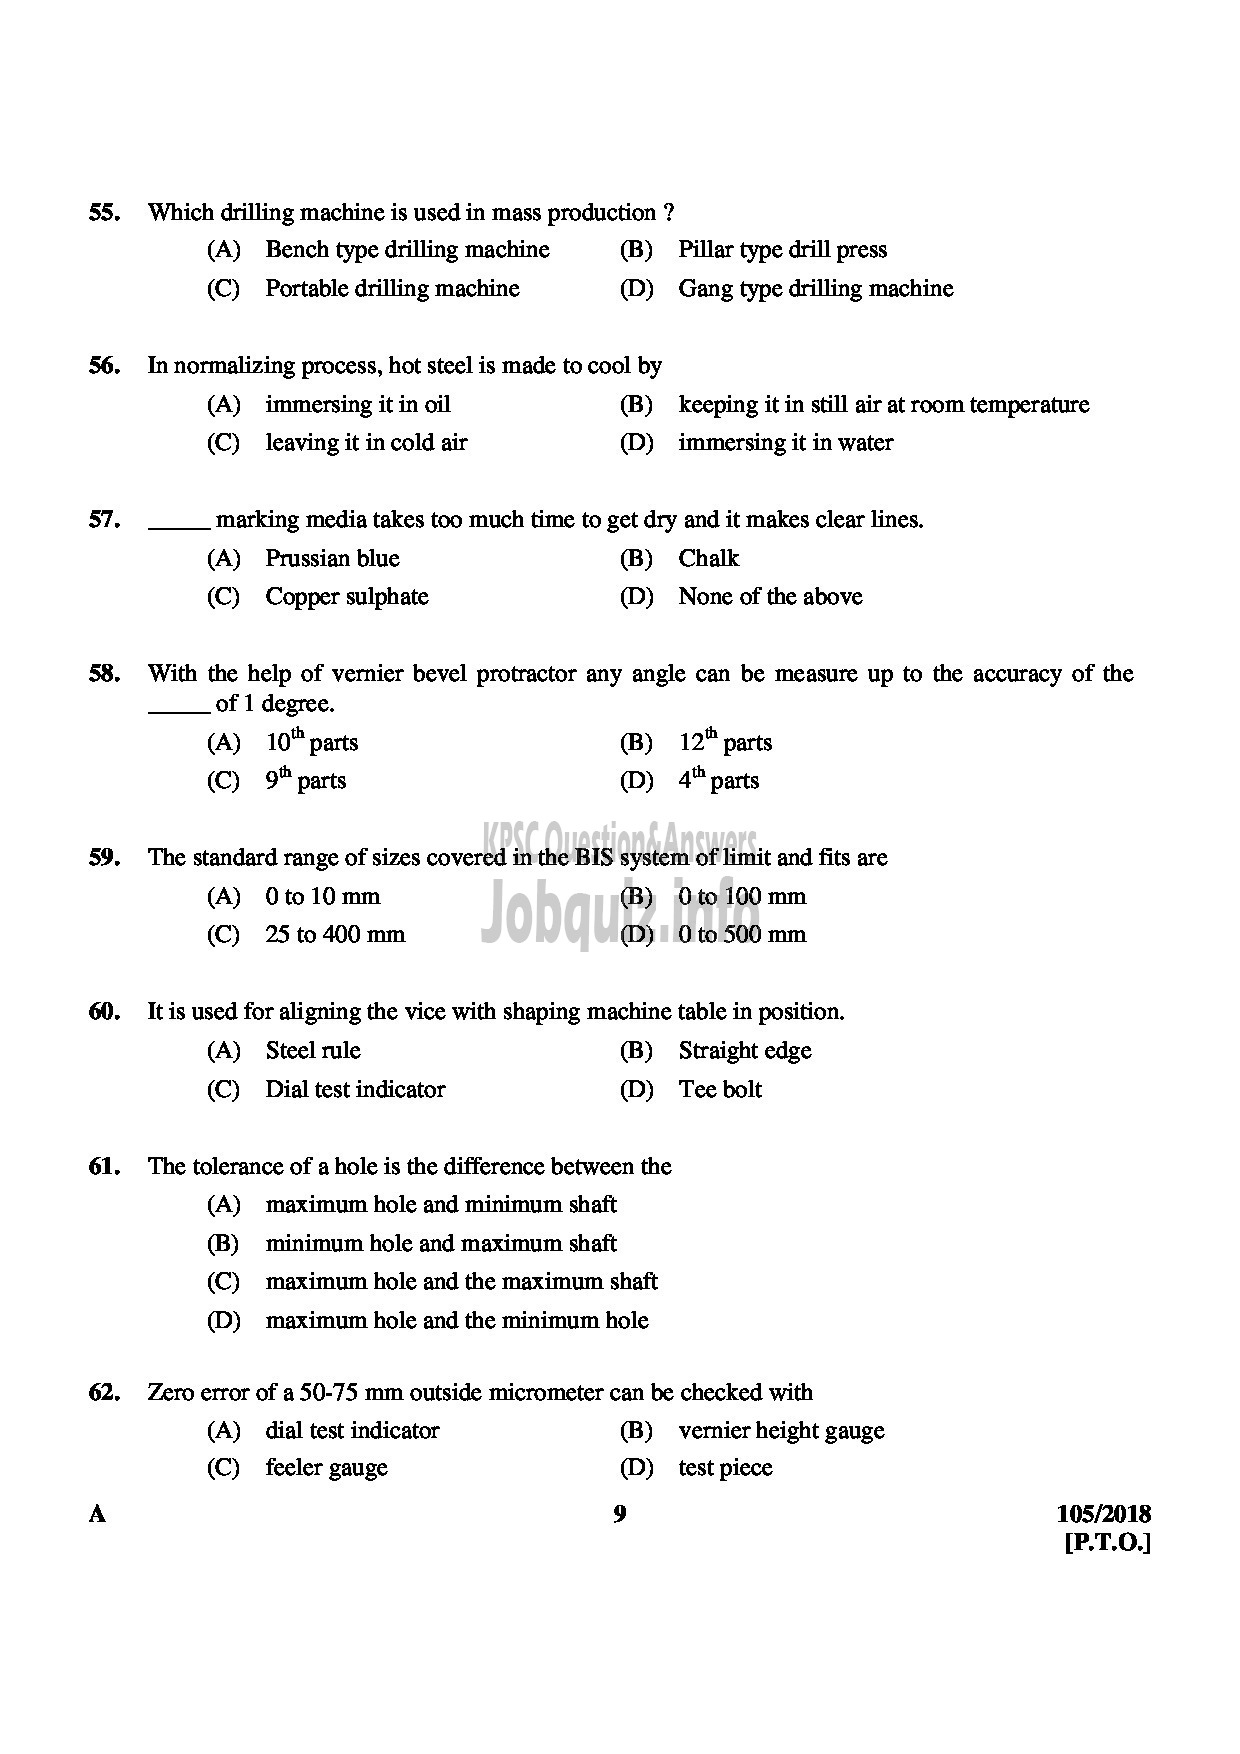 Kerala PSC Question Paper - JUNIOR INSTRUCTOR MACHINIST INDUSTRIAL TRAINING English -9